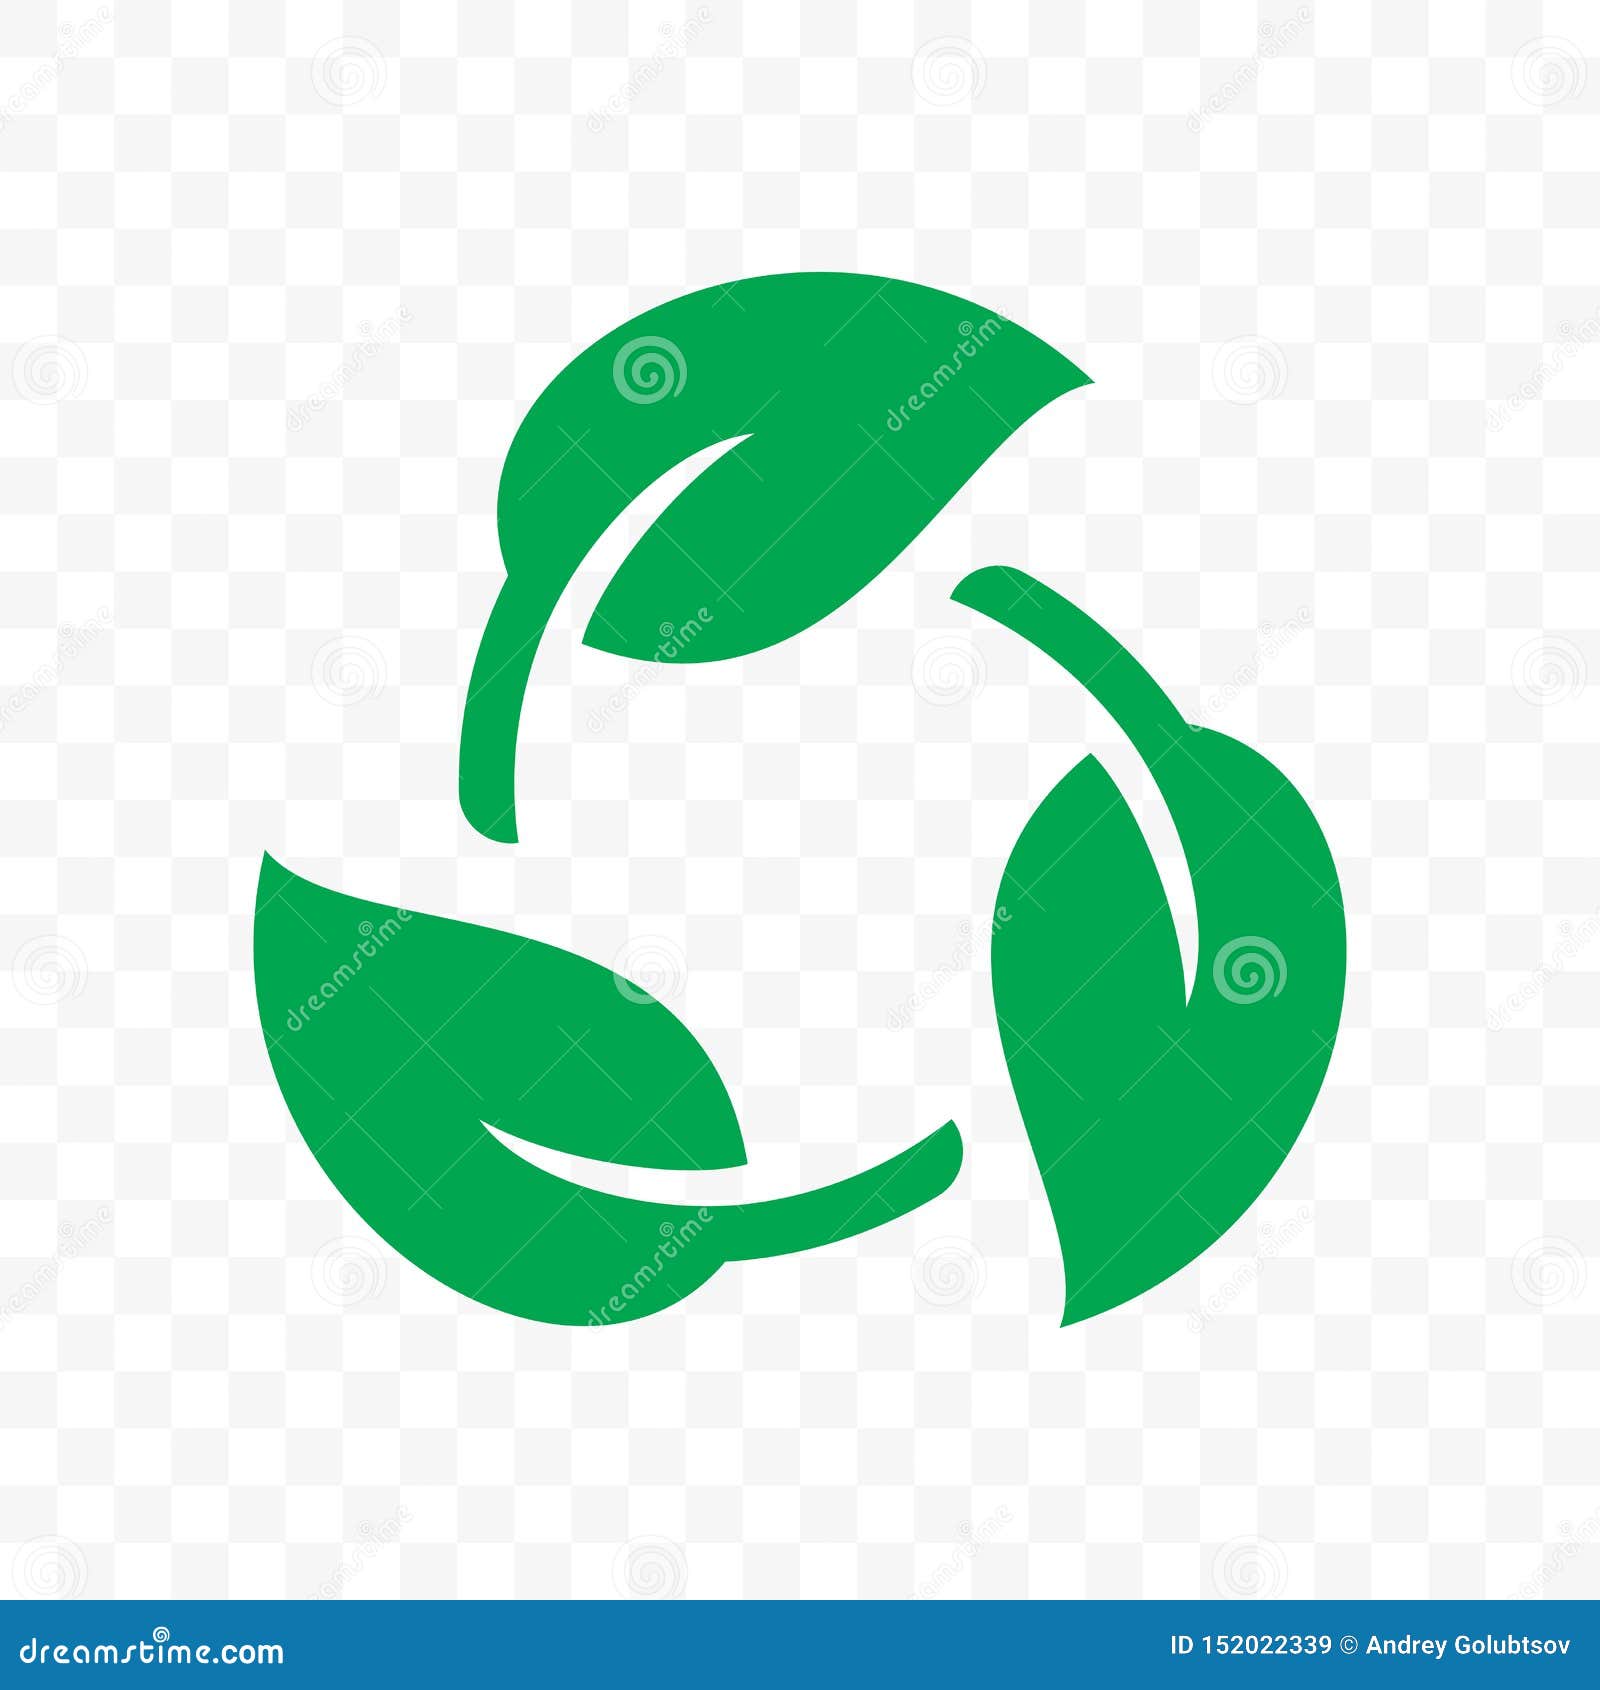 biodegradable recyclable plastic free package icon.  bio recyclable degradable label logo